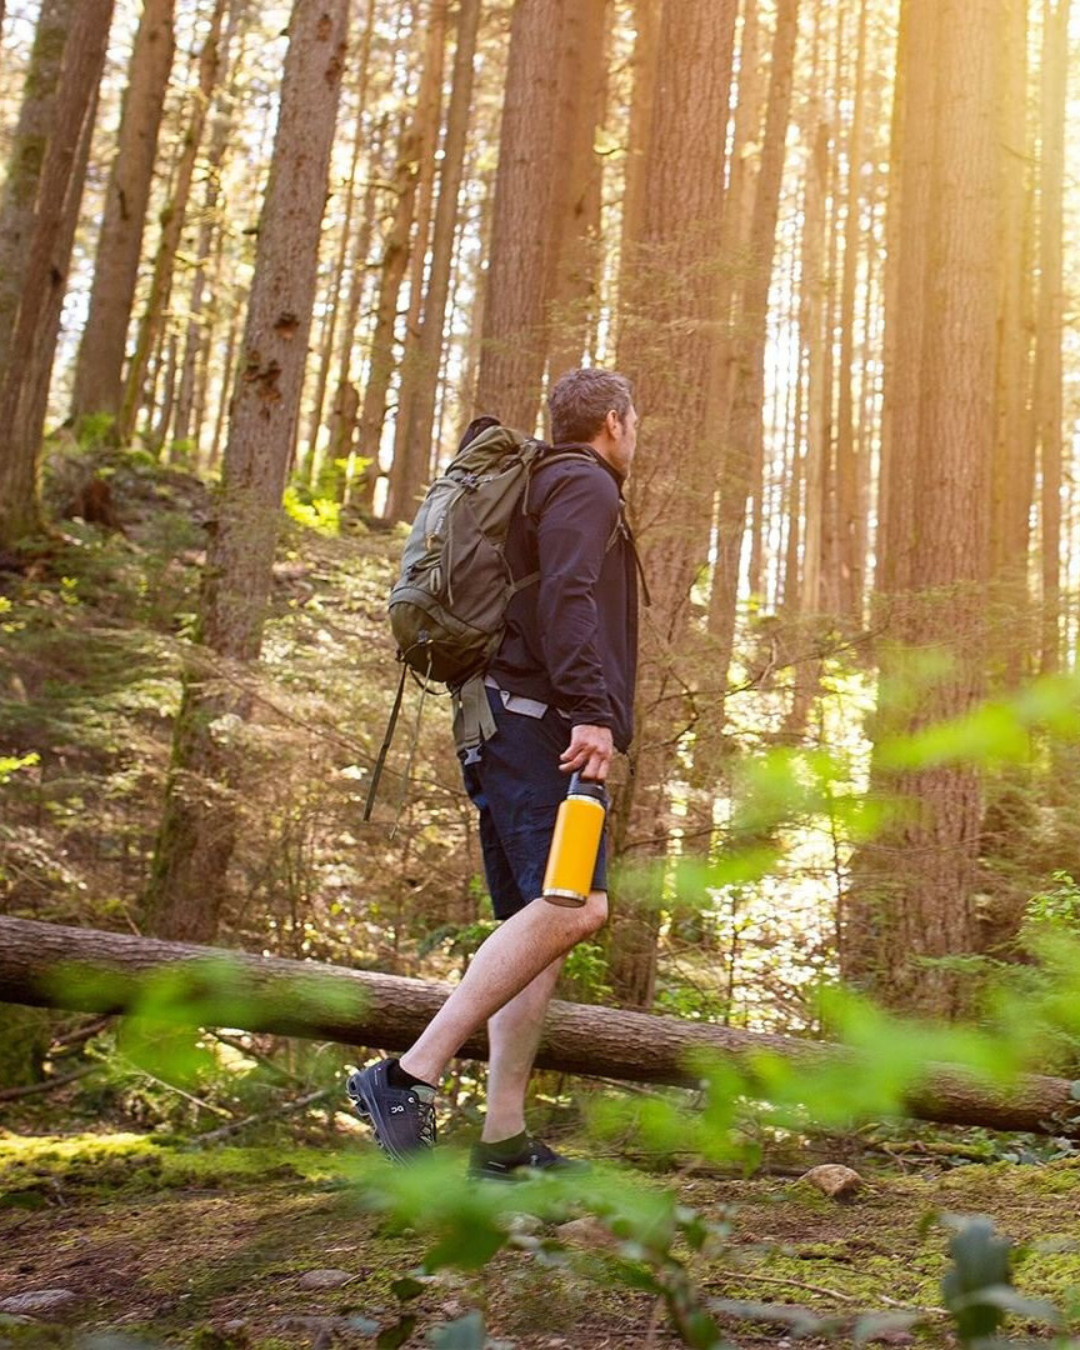 A man hiking in the woods holding a yellow water bottle